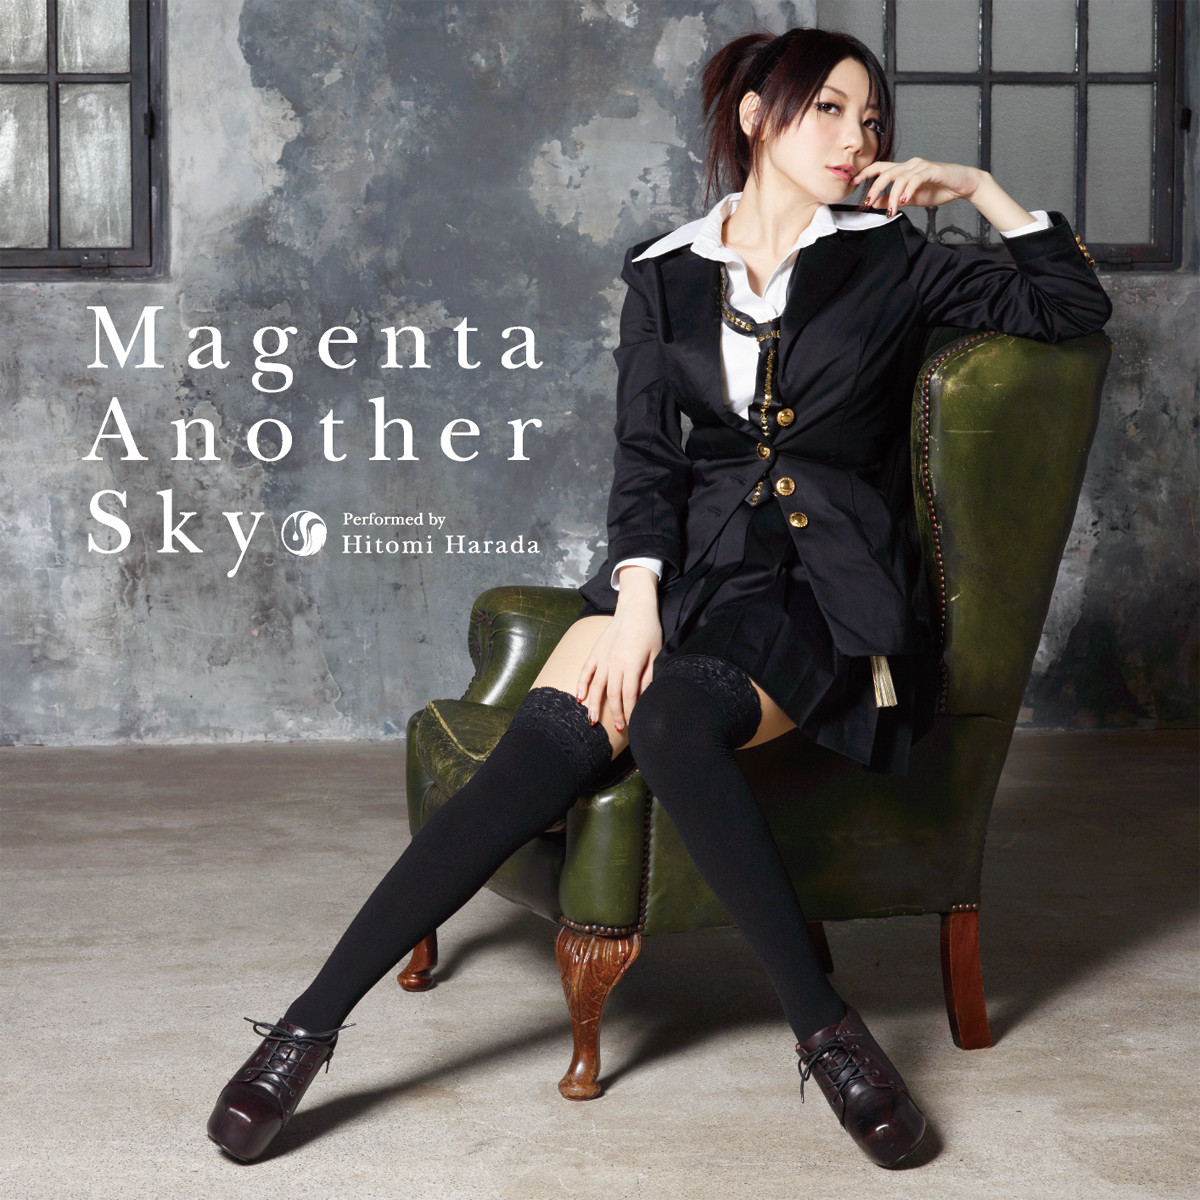 Magenta Another Sky is the fourth single by Harada Hitomi. 